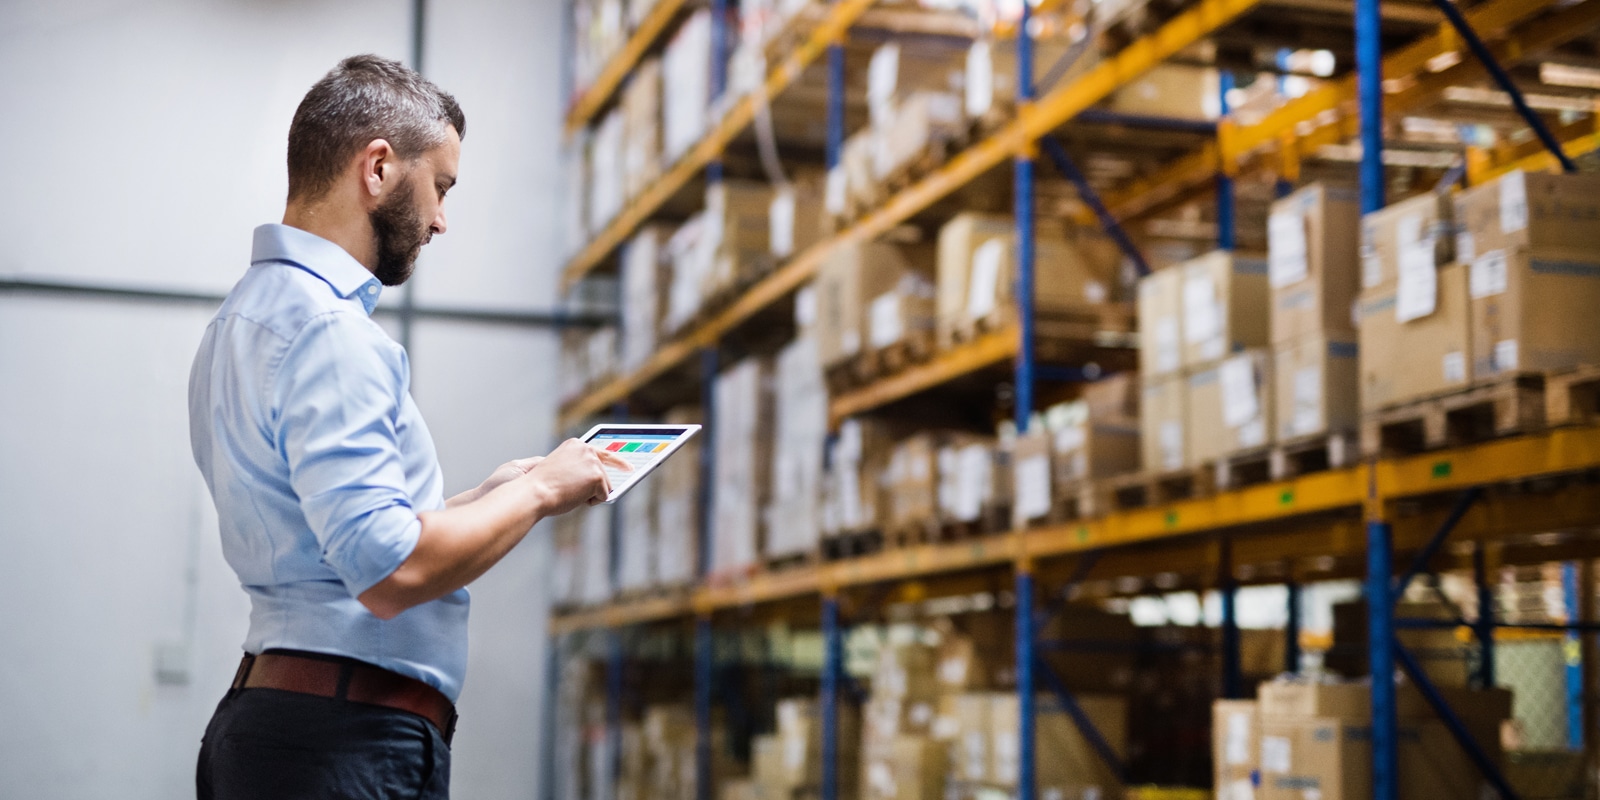 How to Maximize Your Distributor Workflows for a Better Customer Experience